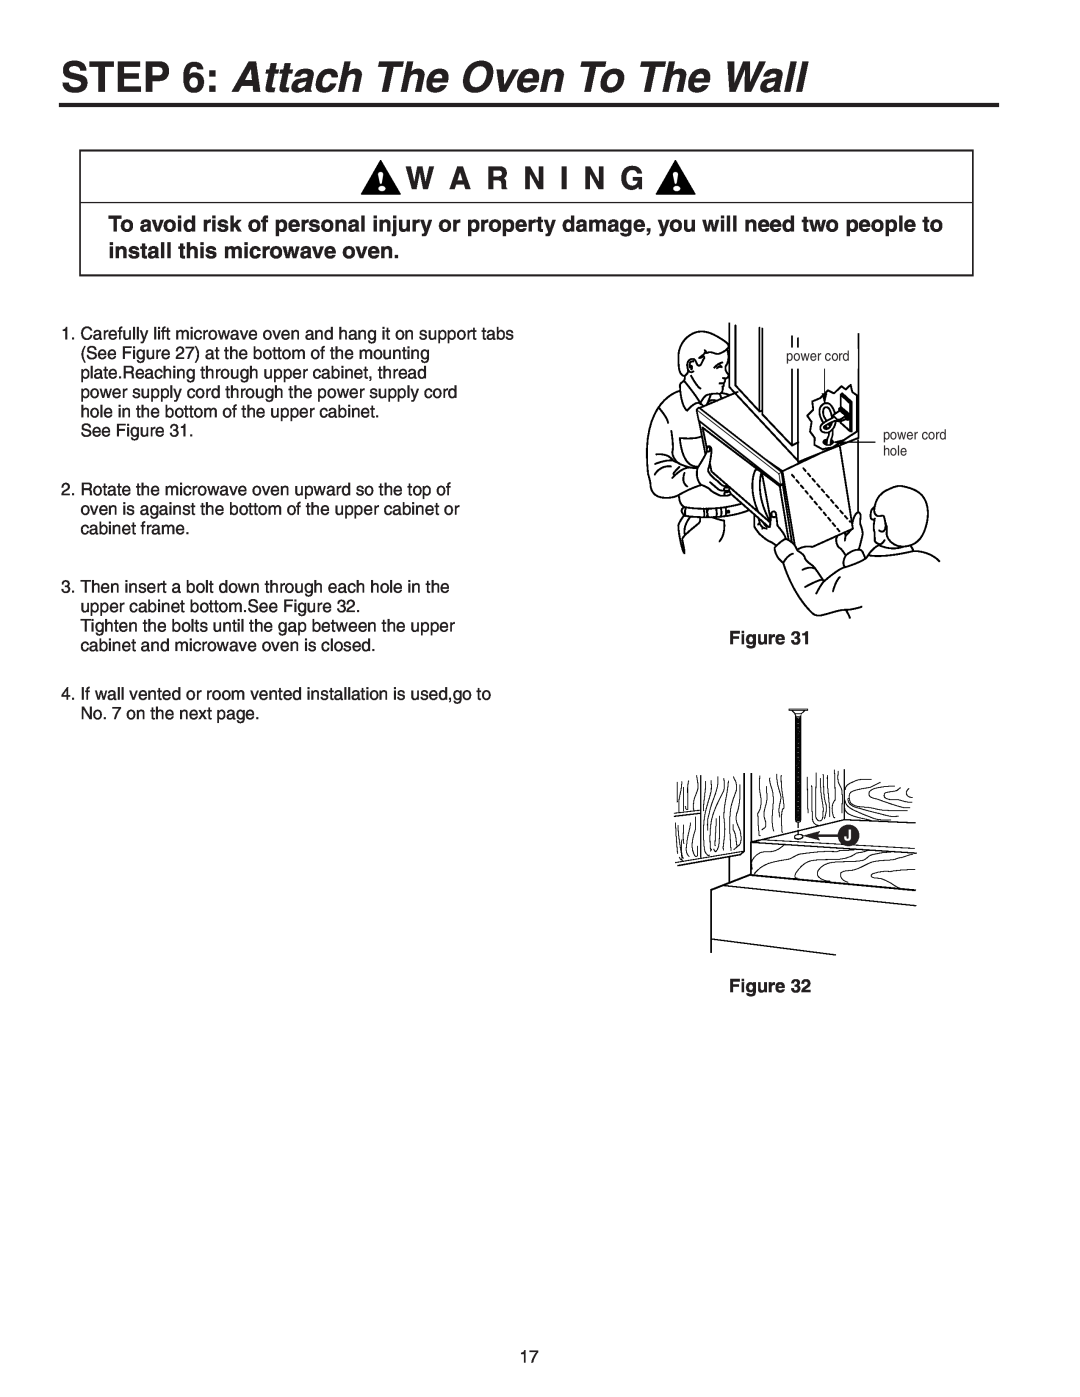 Maytag 8101P641-60 installation instructions Attach The Oven To The Wall, W A R N I N G 